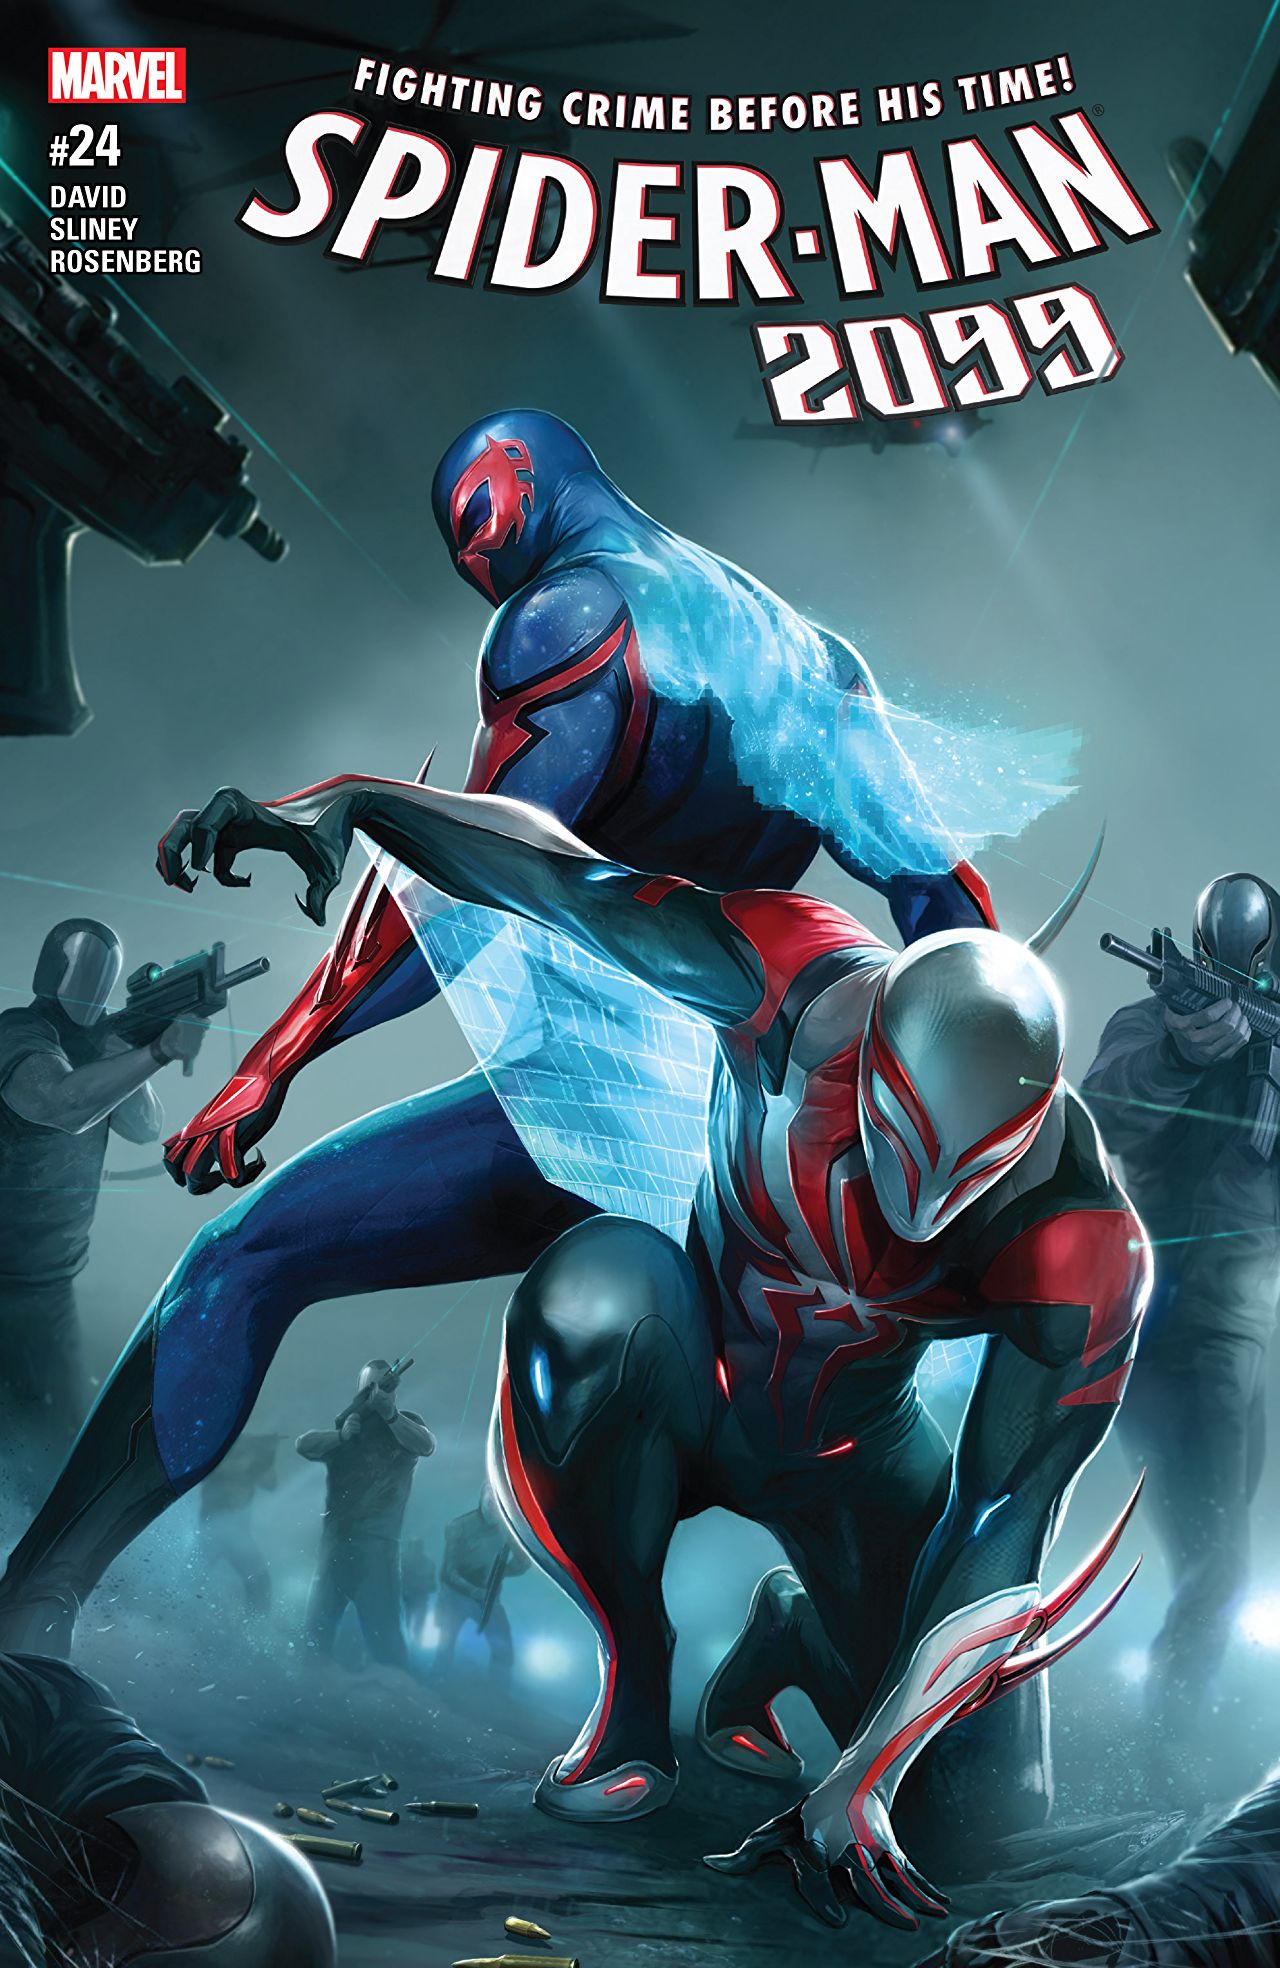 Spider-Man 2099 #24 Review